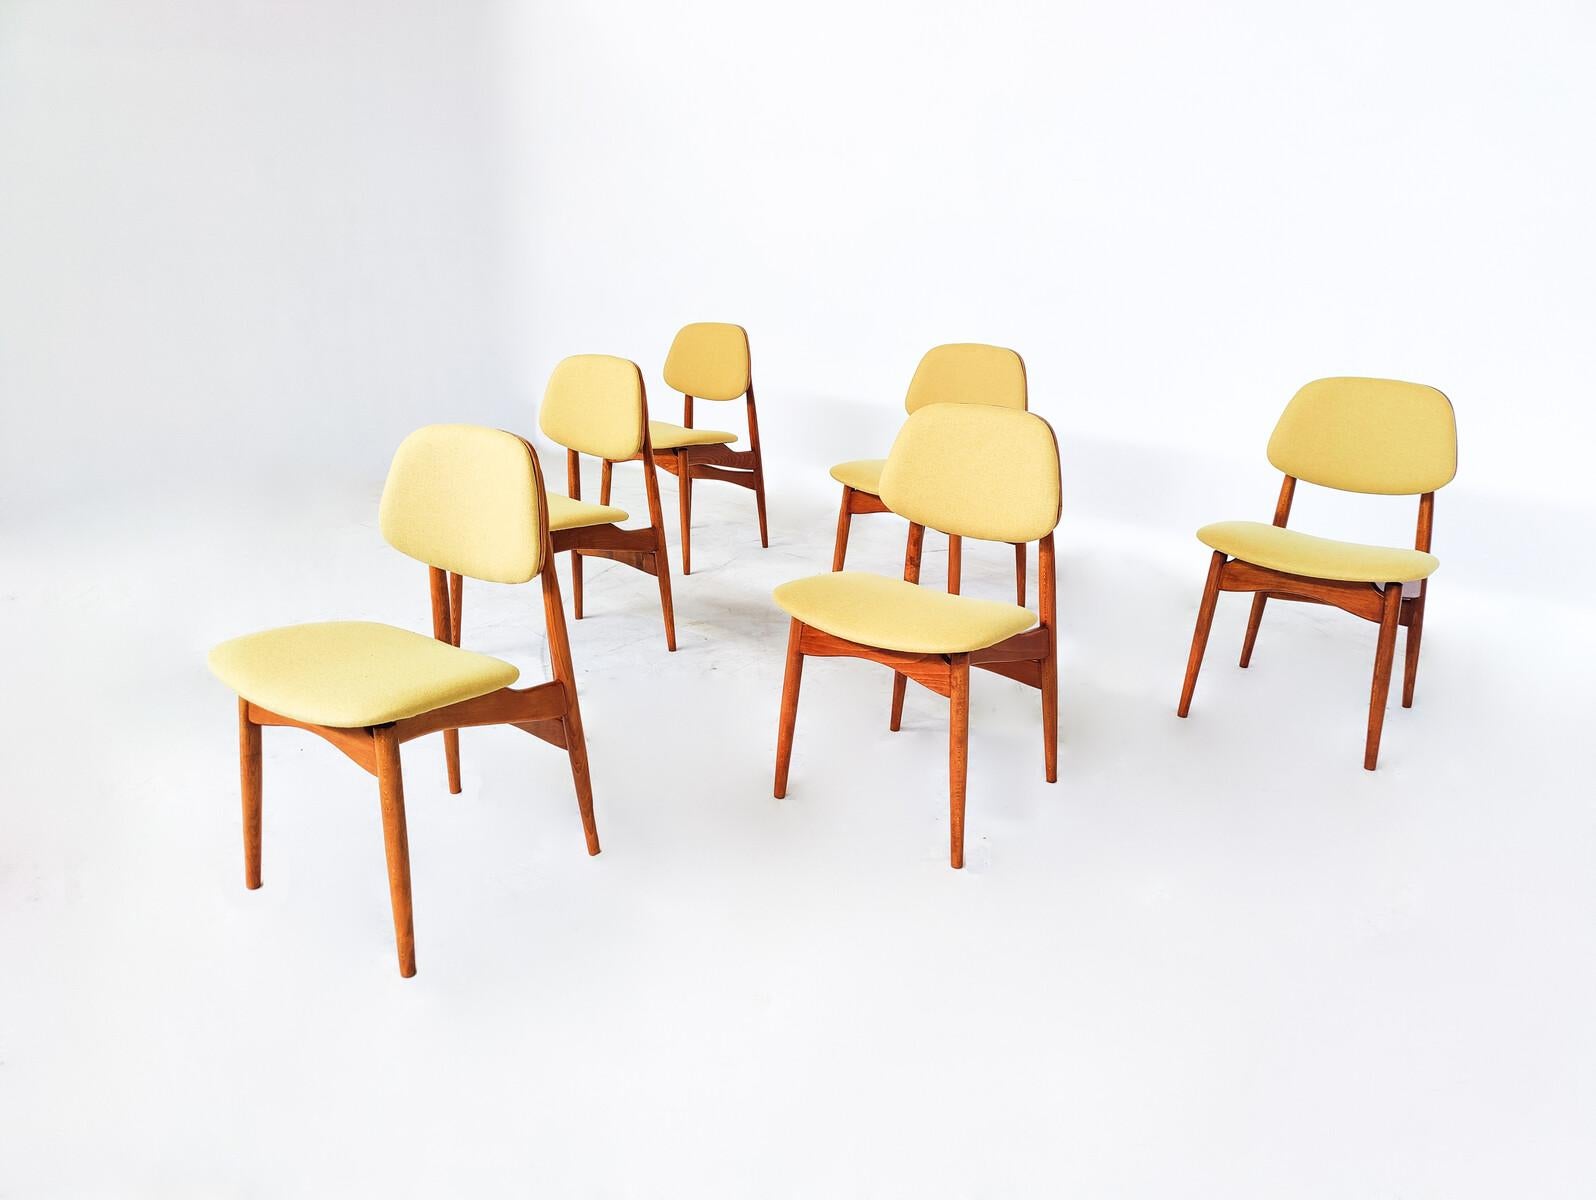 Mid-Century Modern Set of 6 Dining Chairs, Italy, 1960s - New Upholstery.